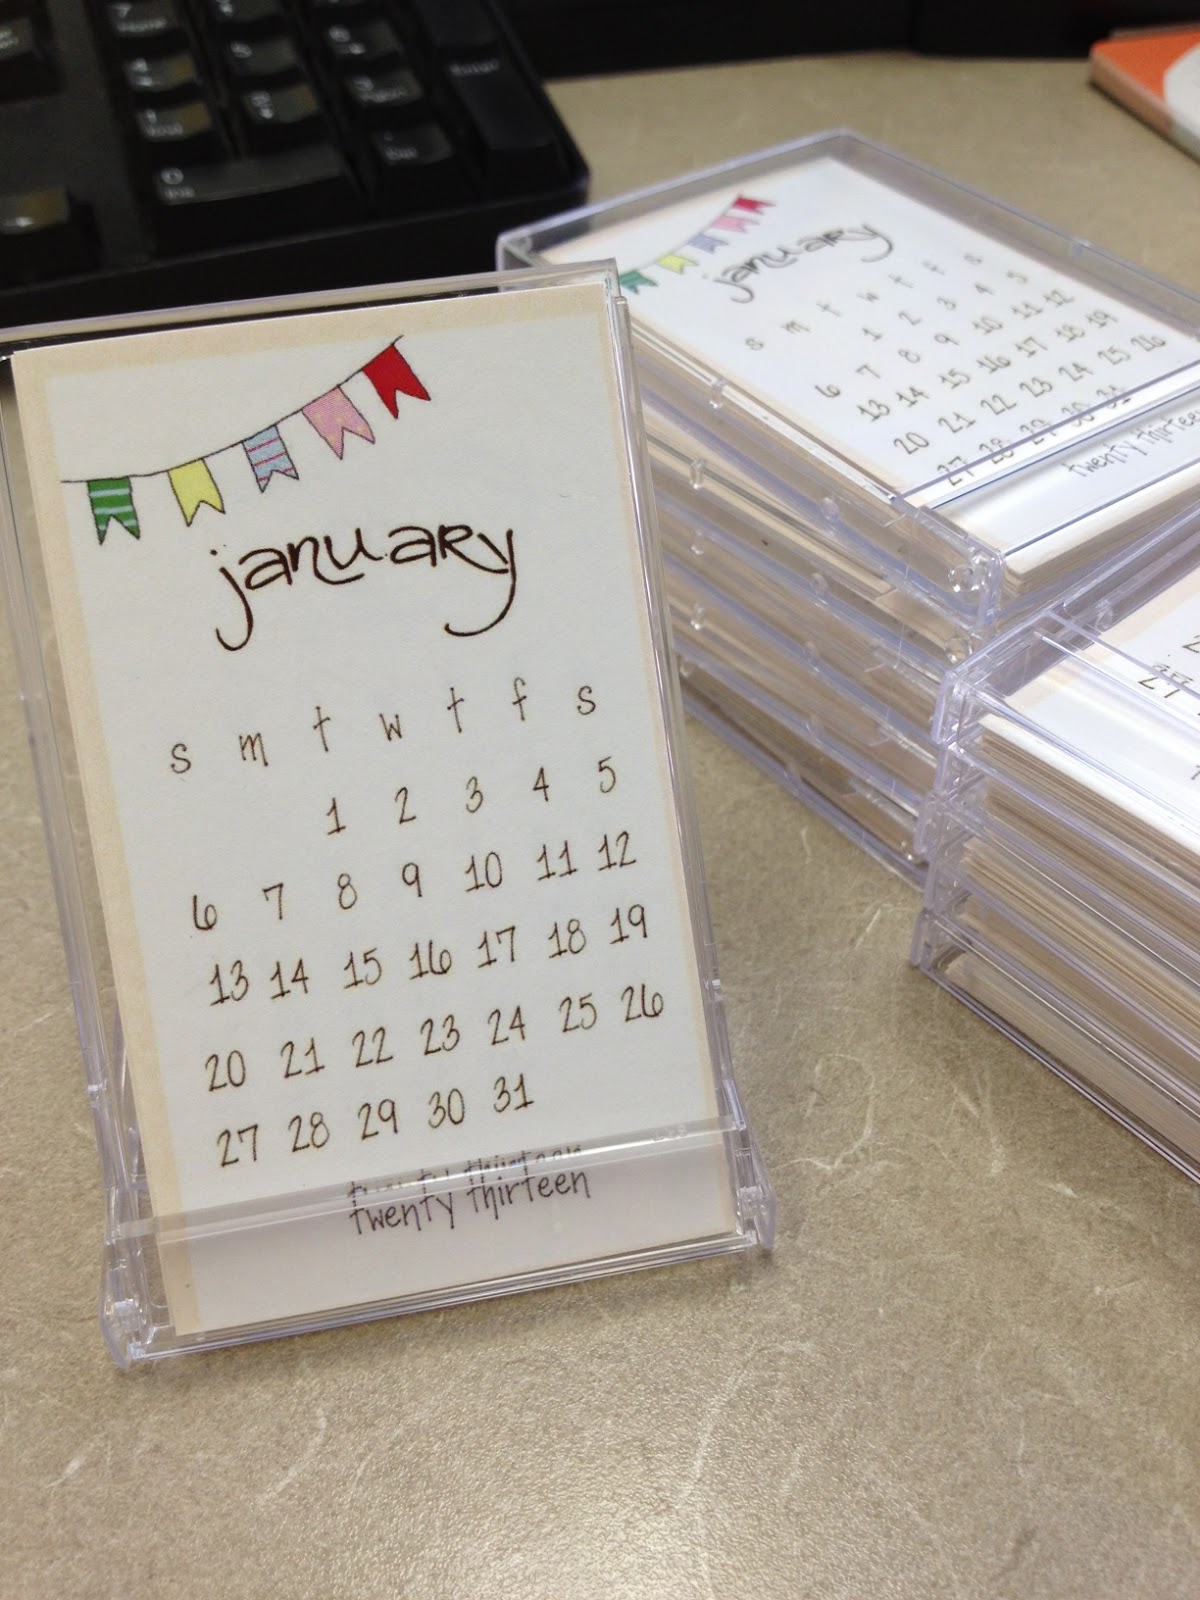 I can totally make that Holiday gifting Mini calendars